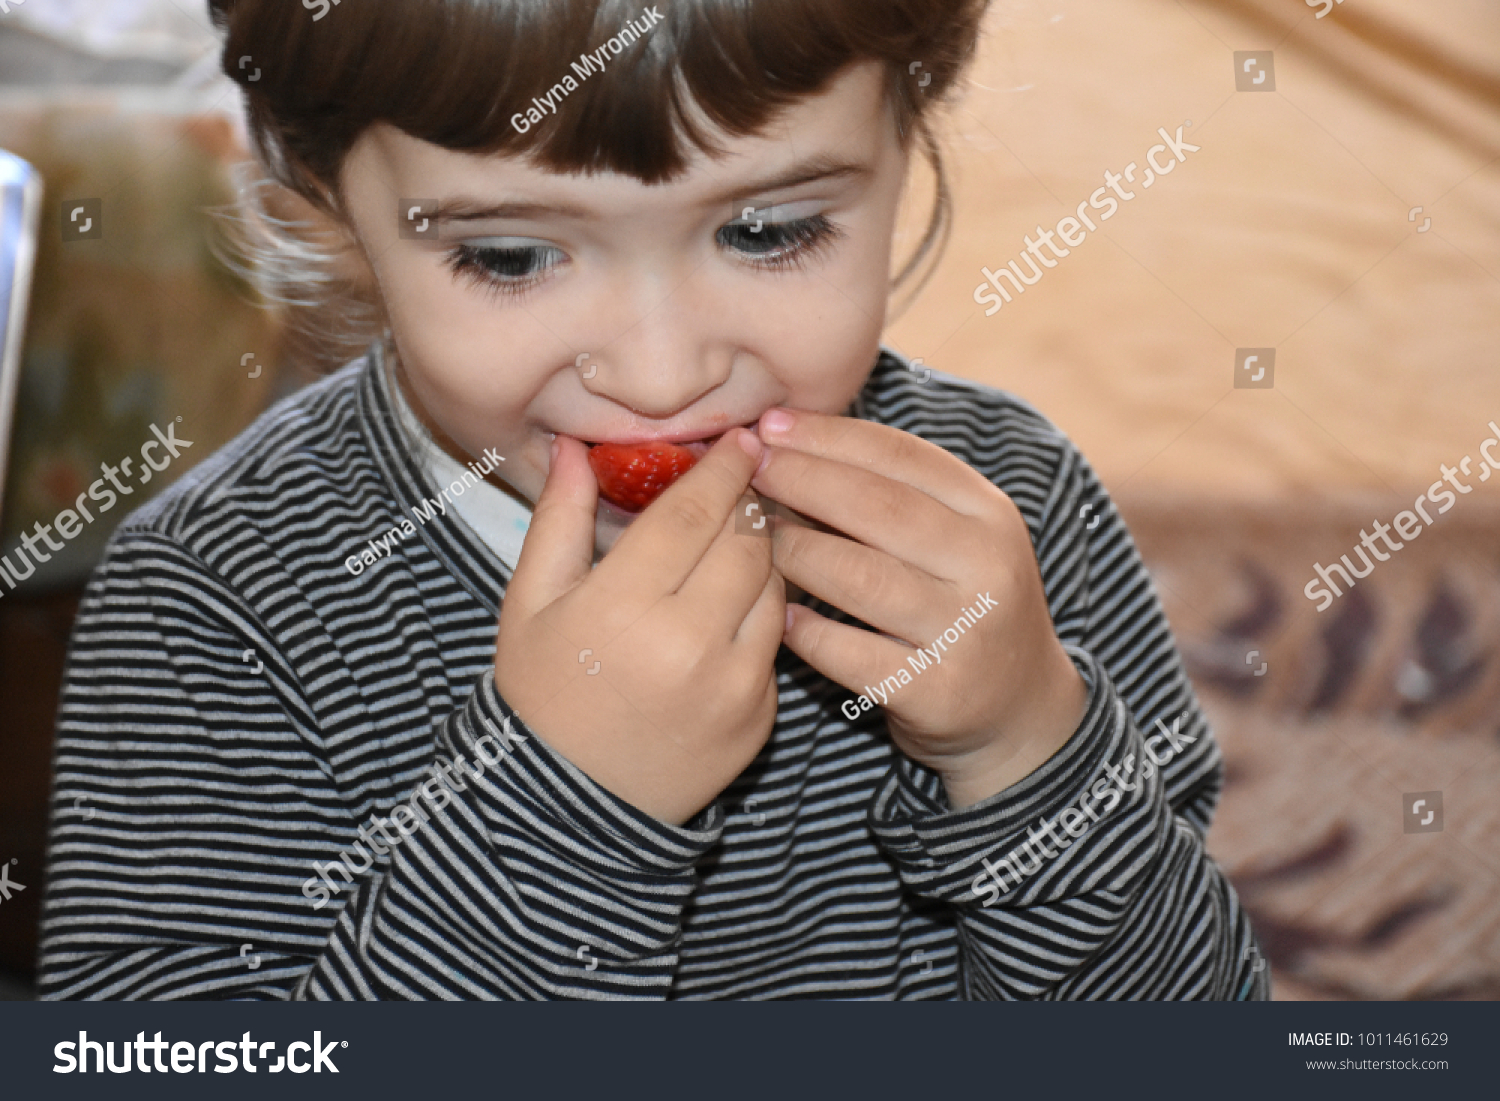 the child eats strawberries  #1011461629